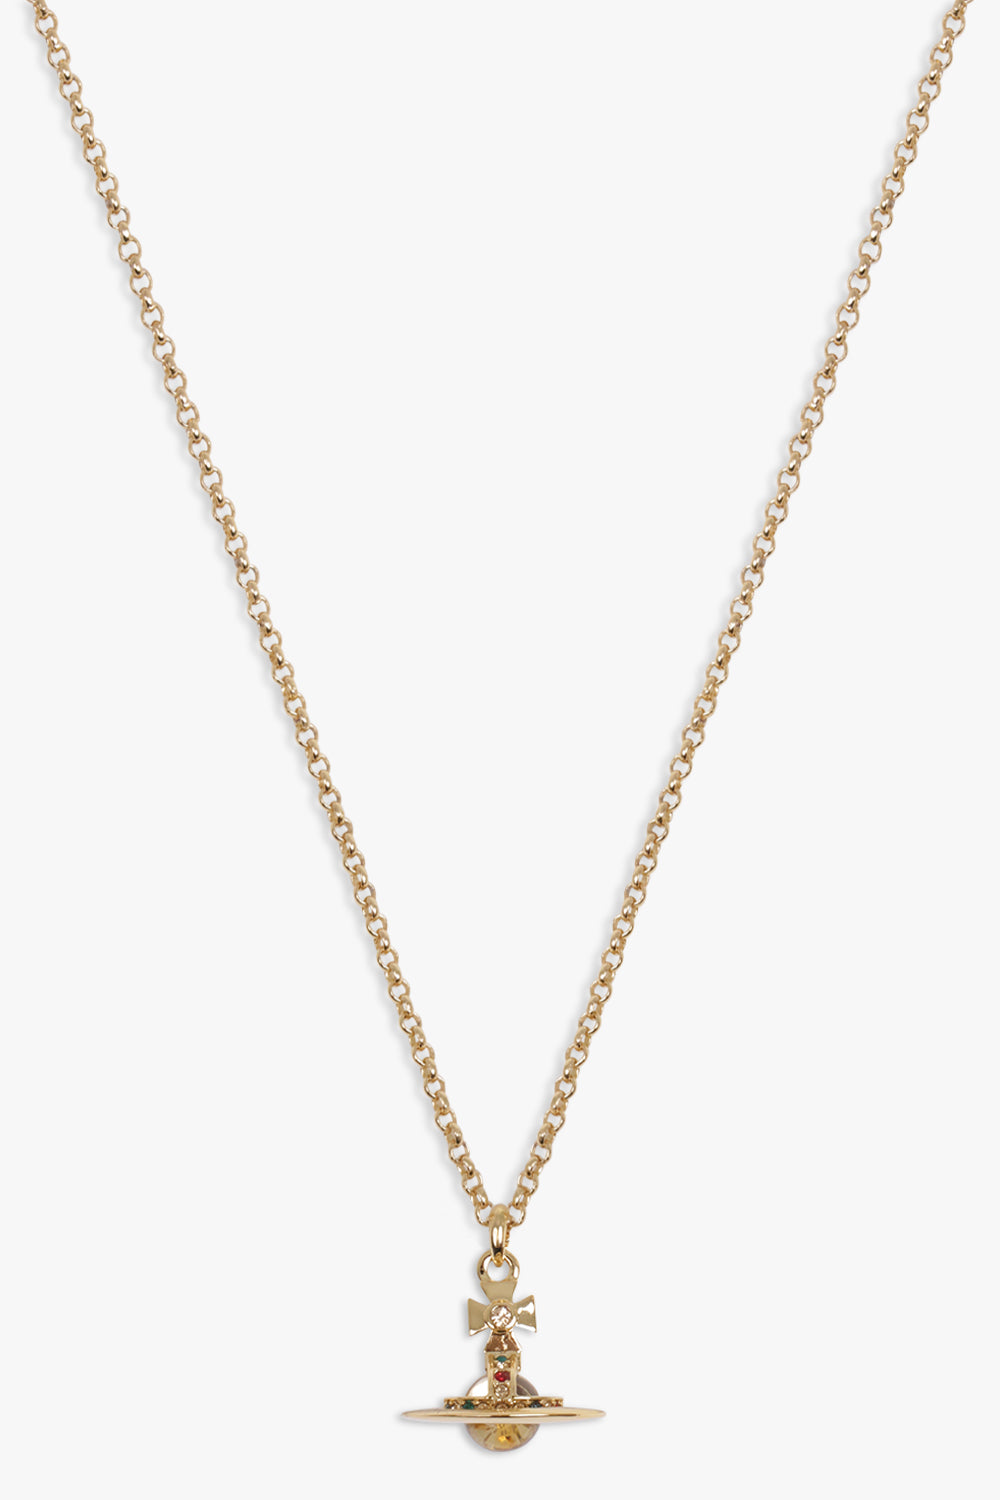 VIVIENNE WESTWOOD JEWELLRY GOLD / GOLD NEW PETITE ORB PENDANT | GOLD